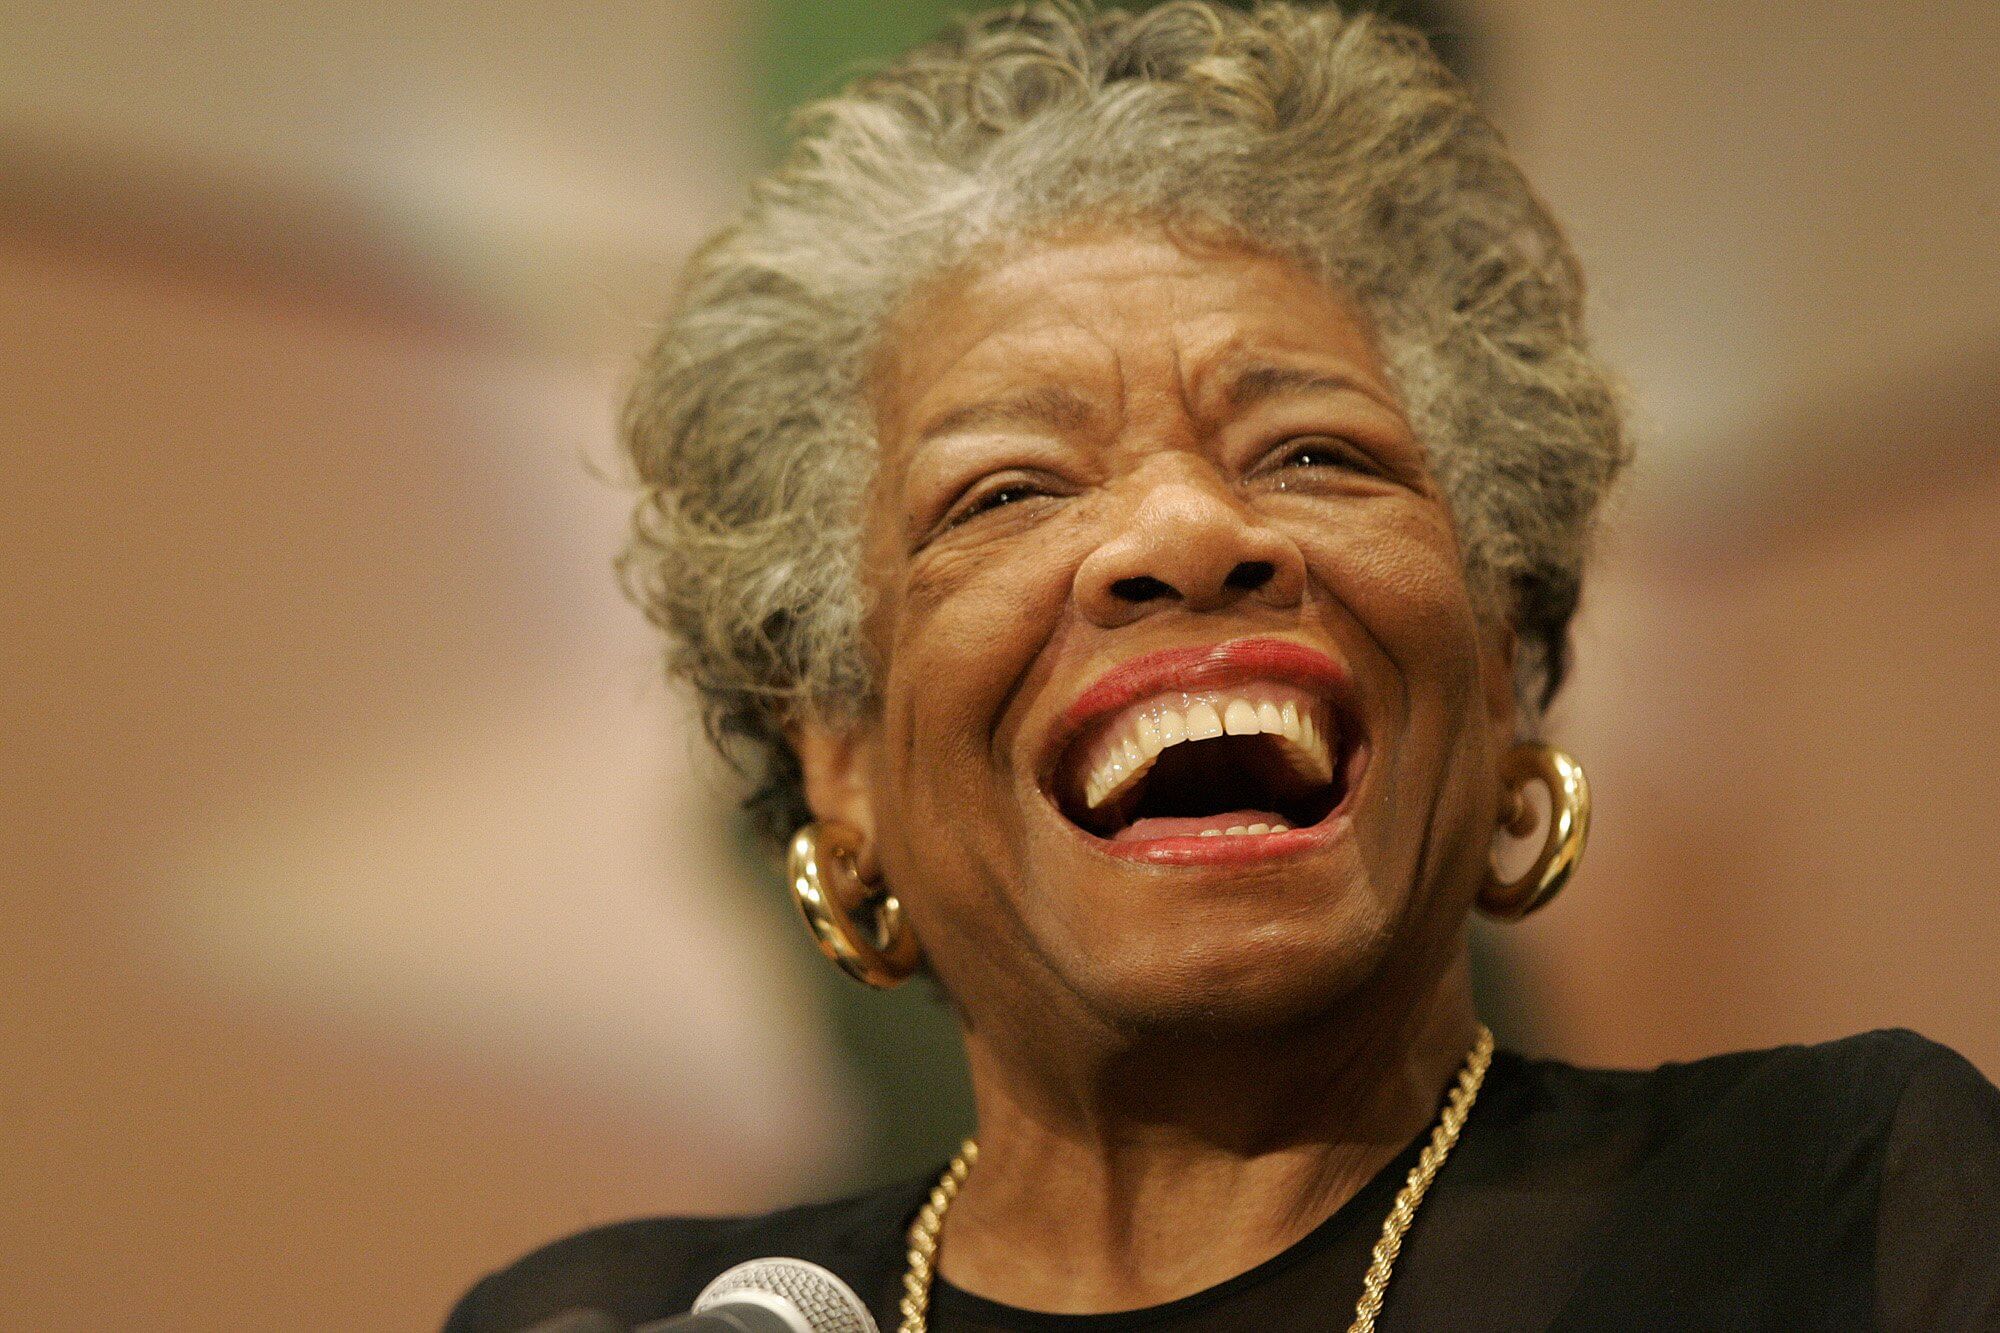 A photo of Maya Angelou laughing during a speech.